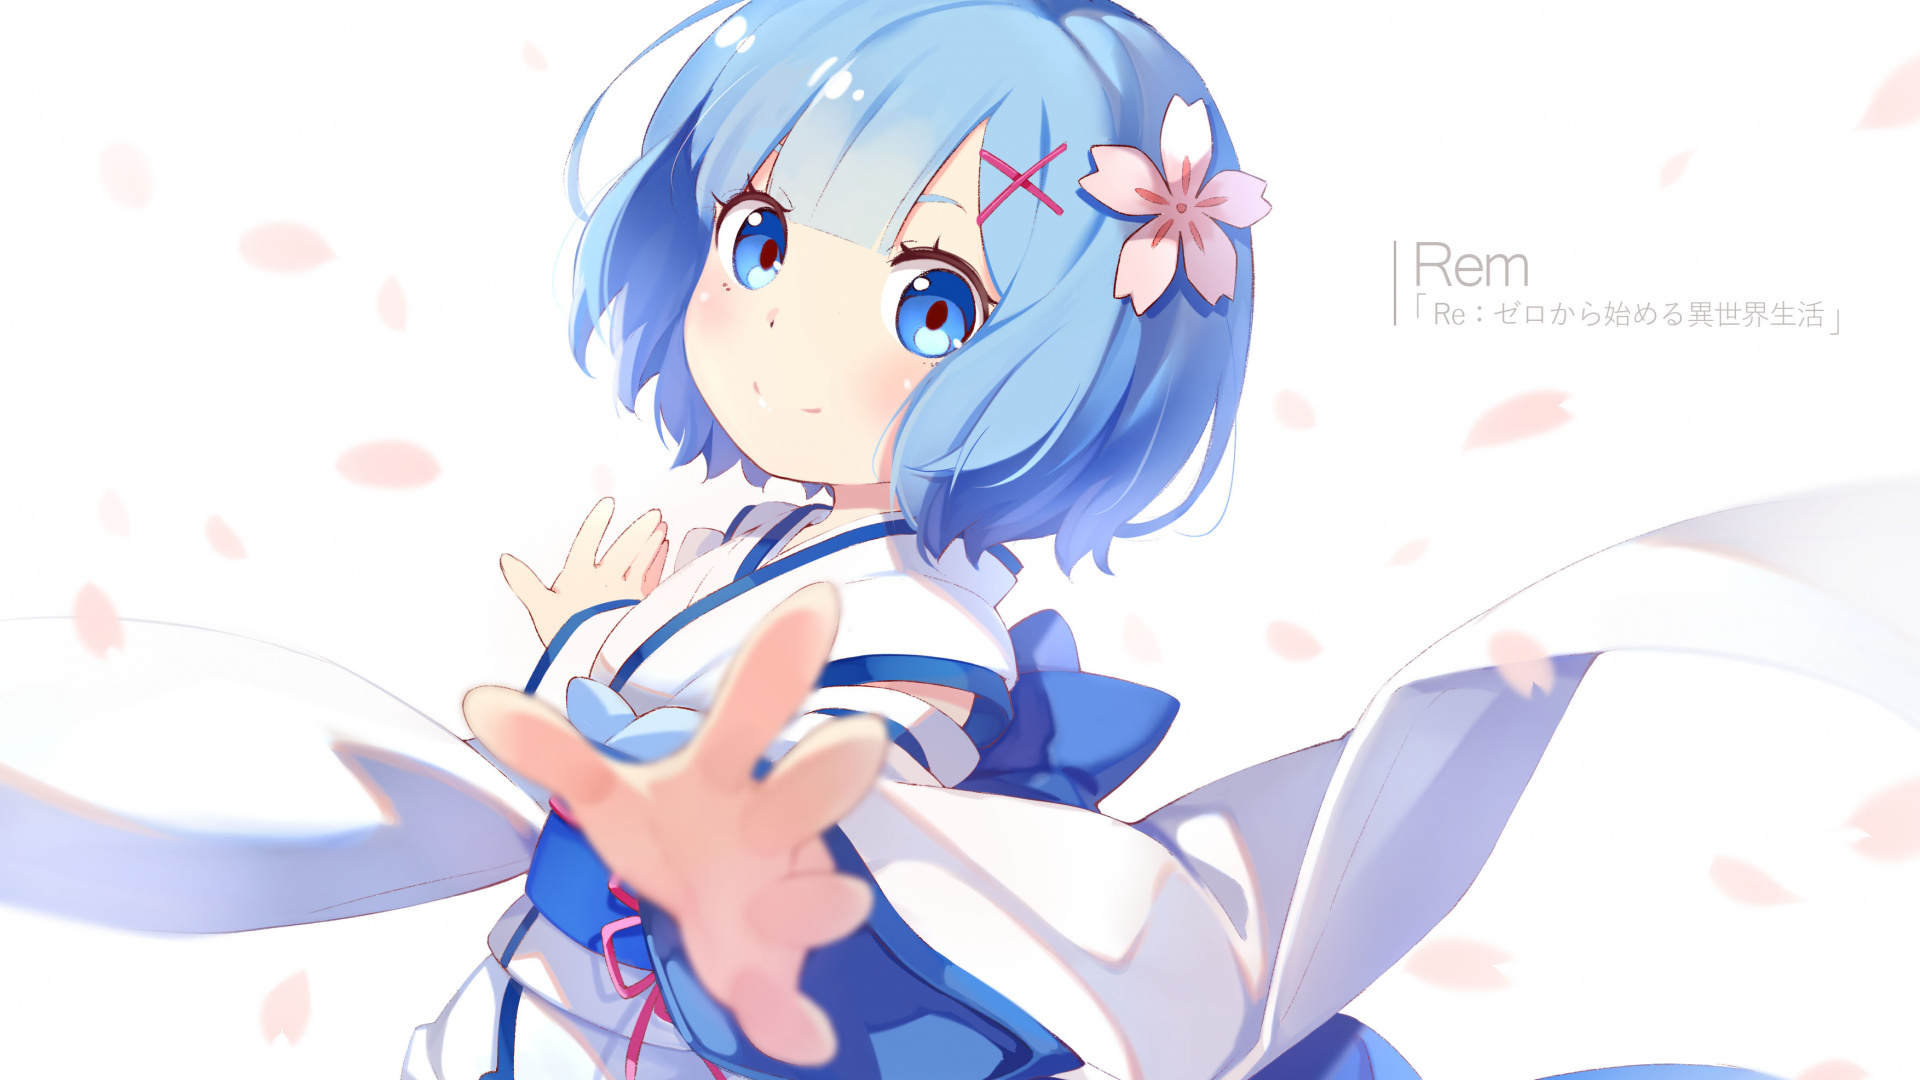 Girl in Blue Dress Anime Character. Wallpaper in 1920x1080 Resolution